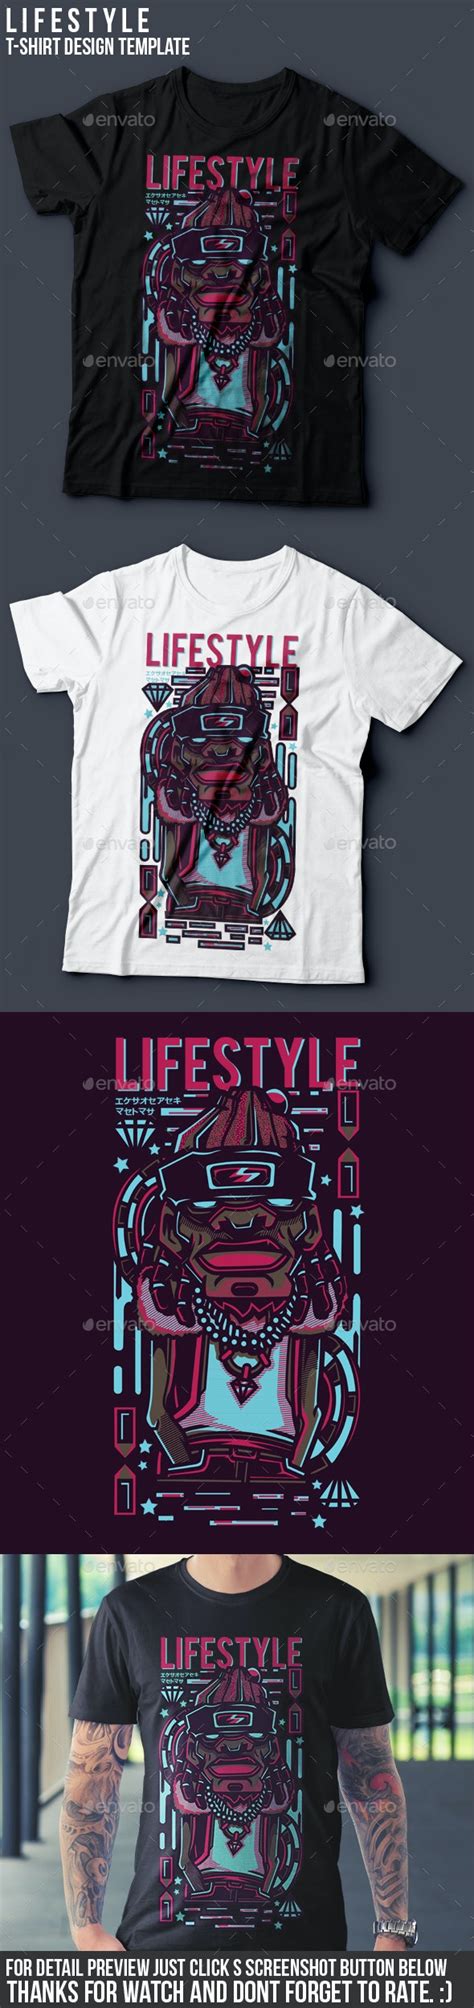 Lifestyle T Shirt Design By Badsyxn Graphicriver